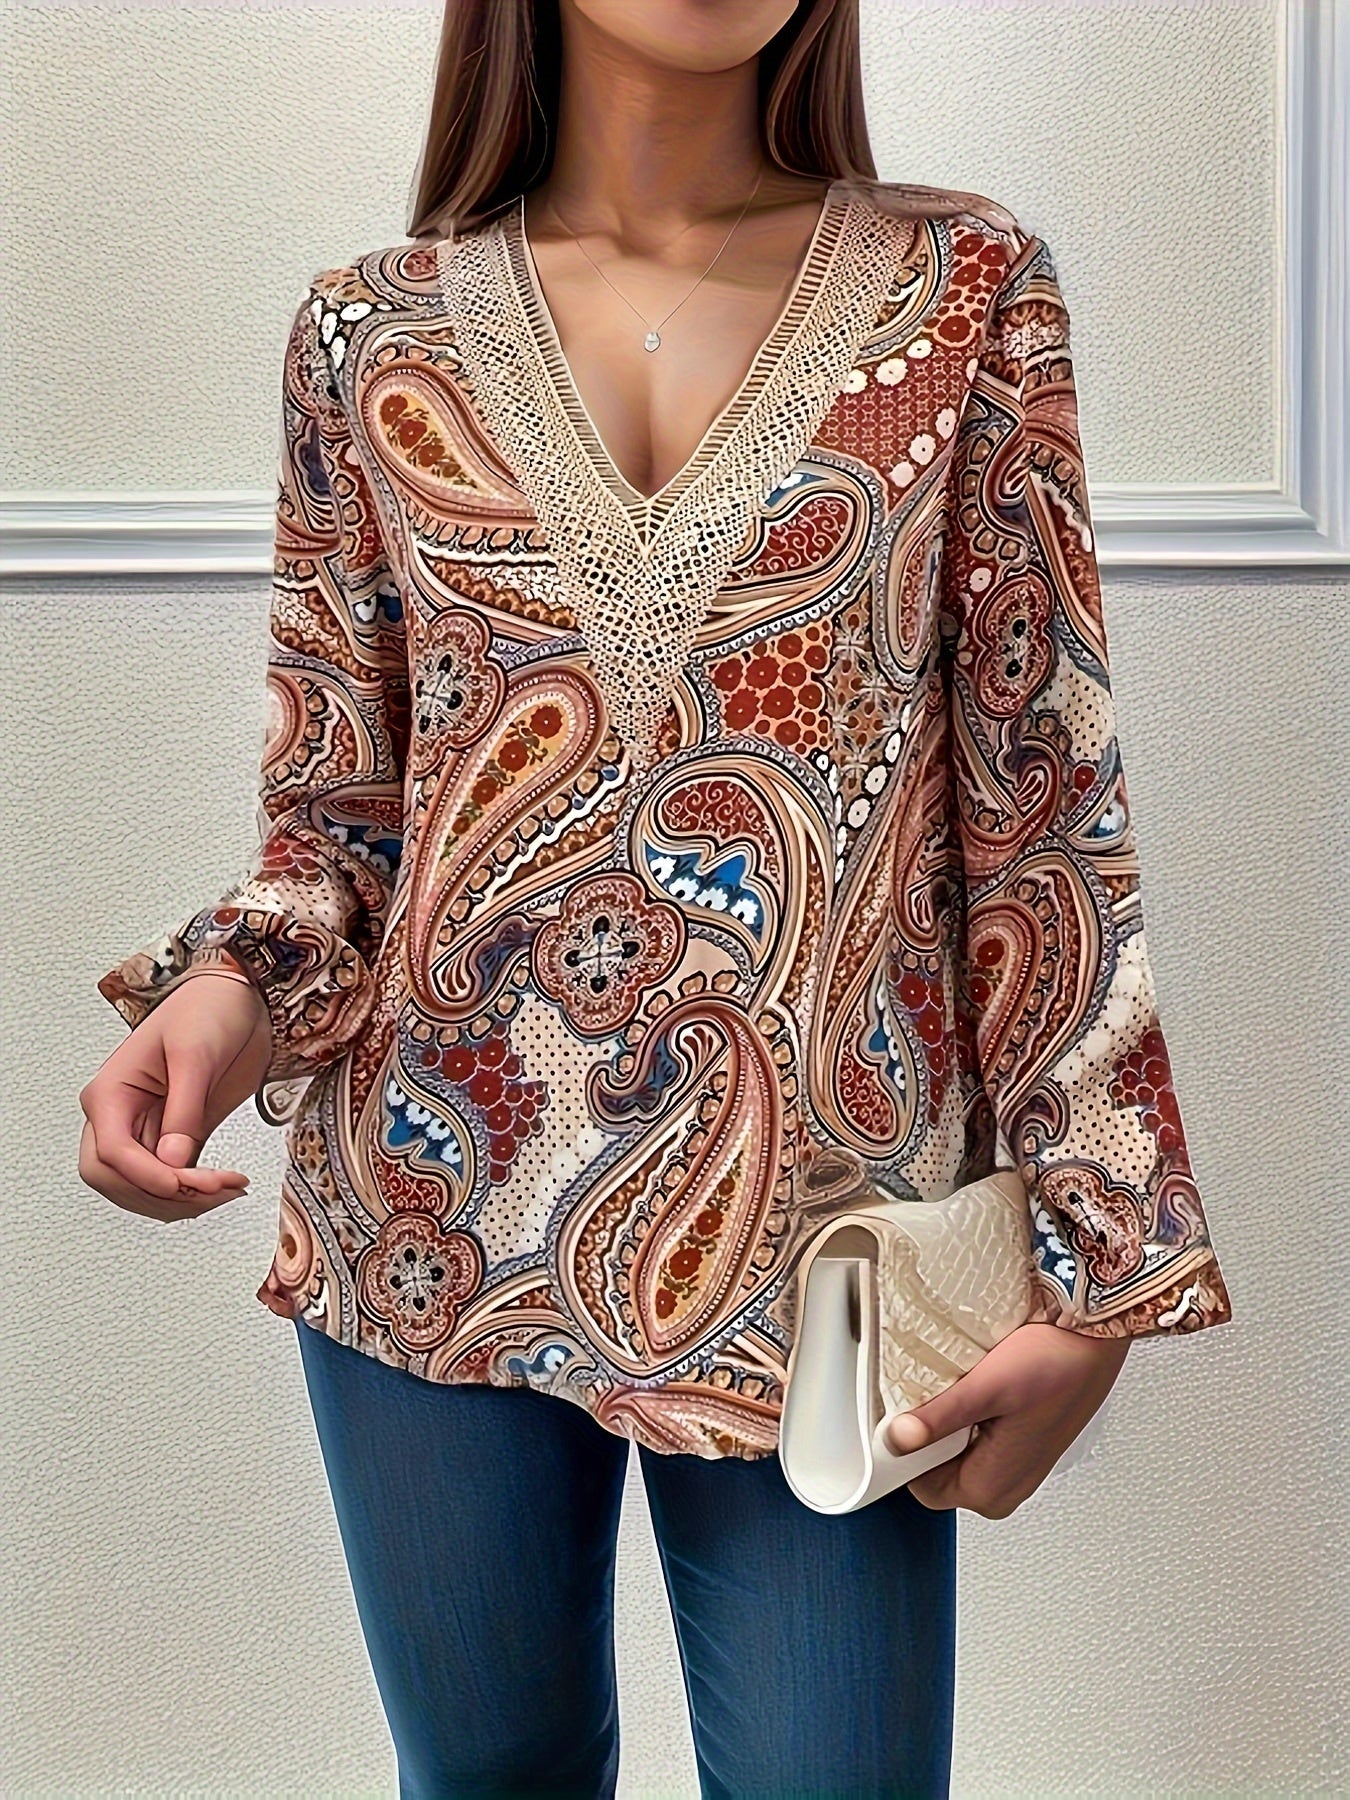 Paisley Print Long Sleeve Blouse For Spring and Summer, Women's Spring&Summer Blouse